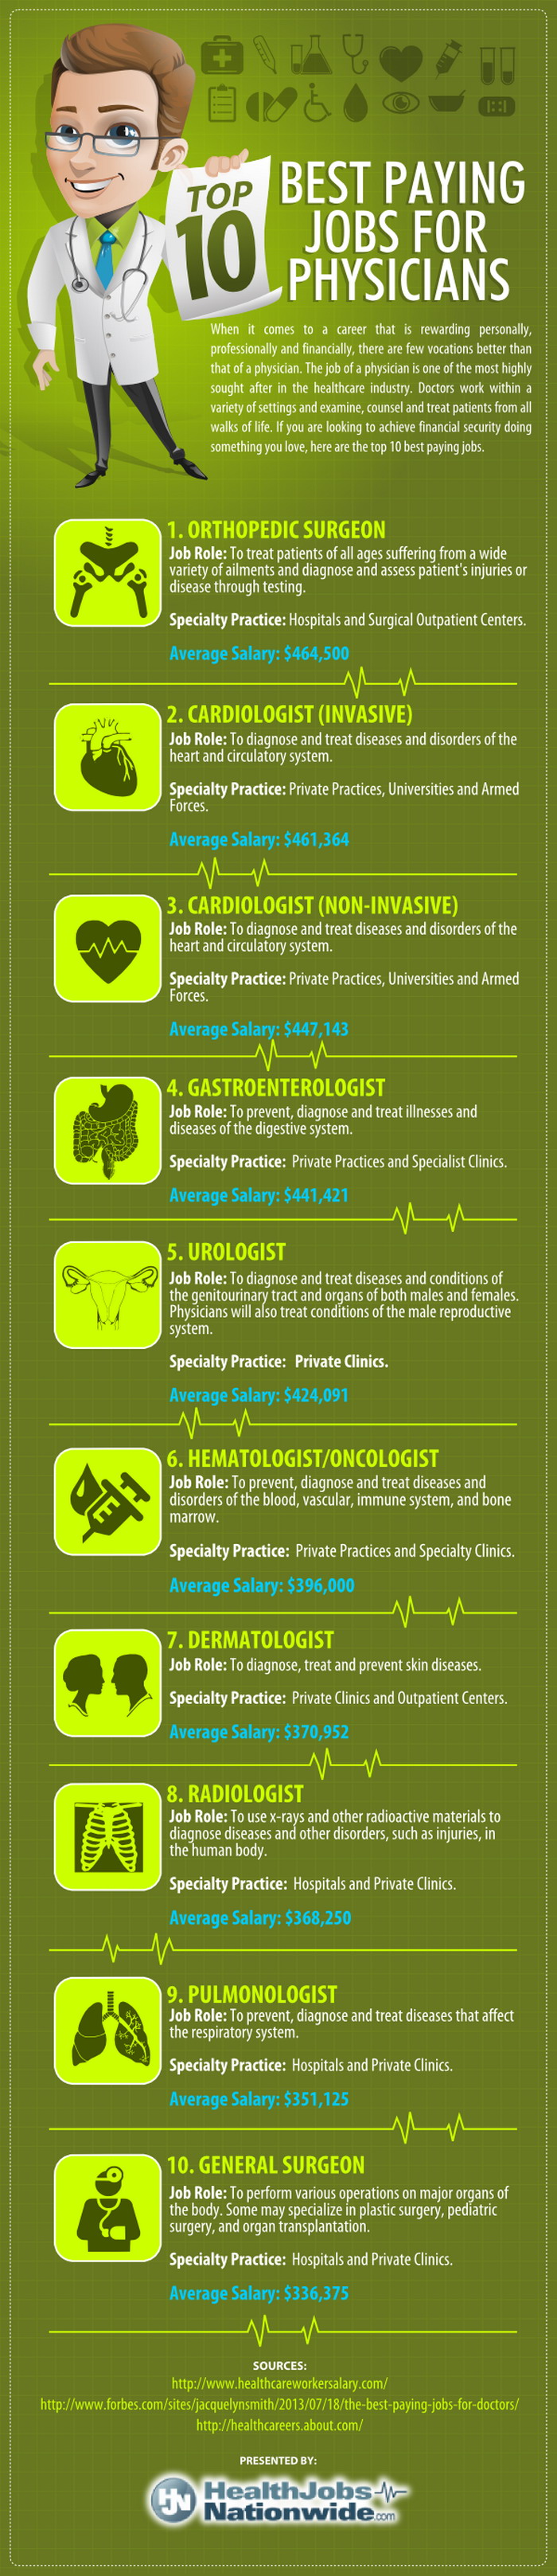 Top 10 Best Paying Jobs for Physicians [Infographic]